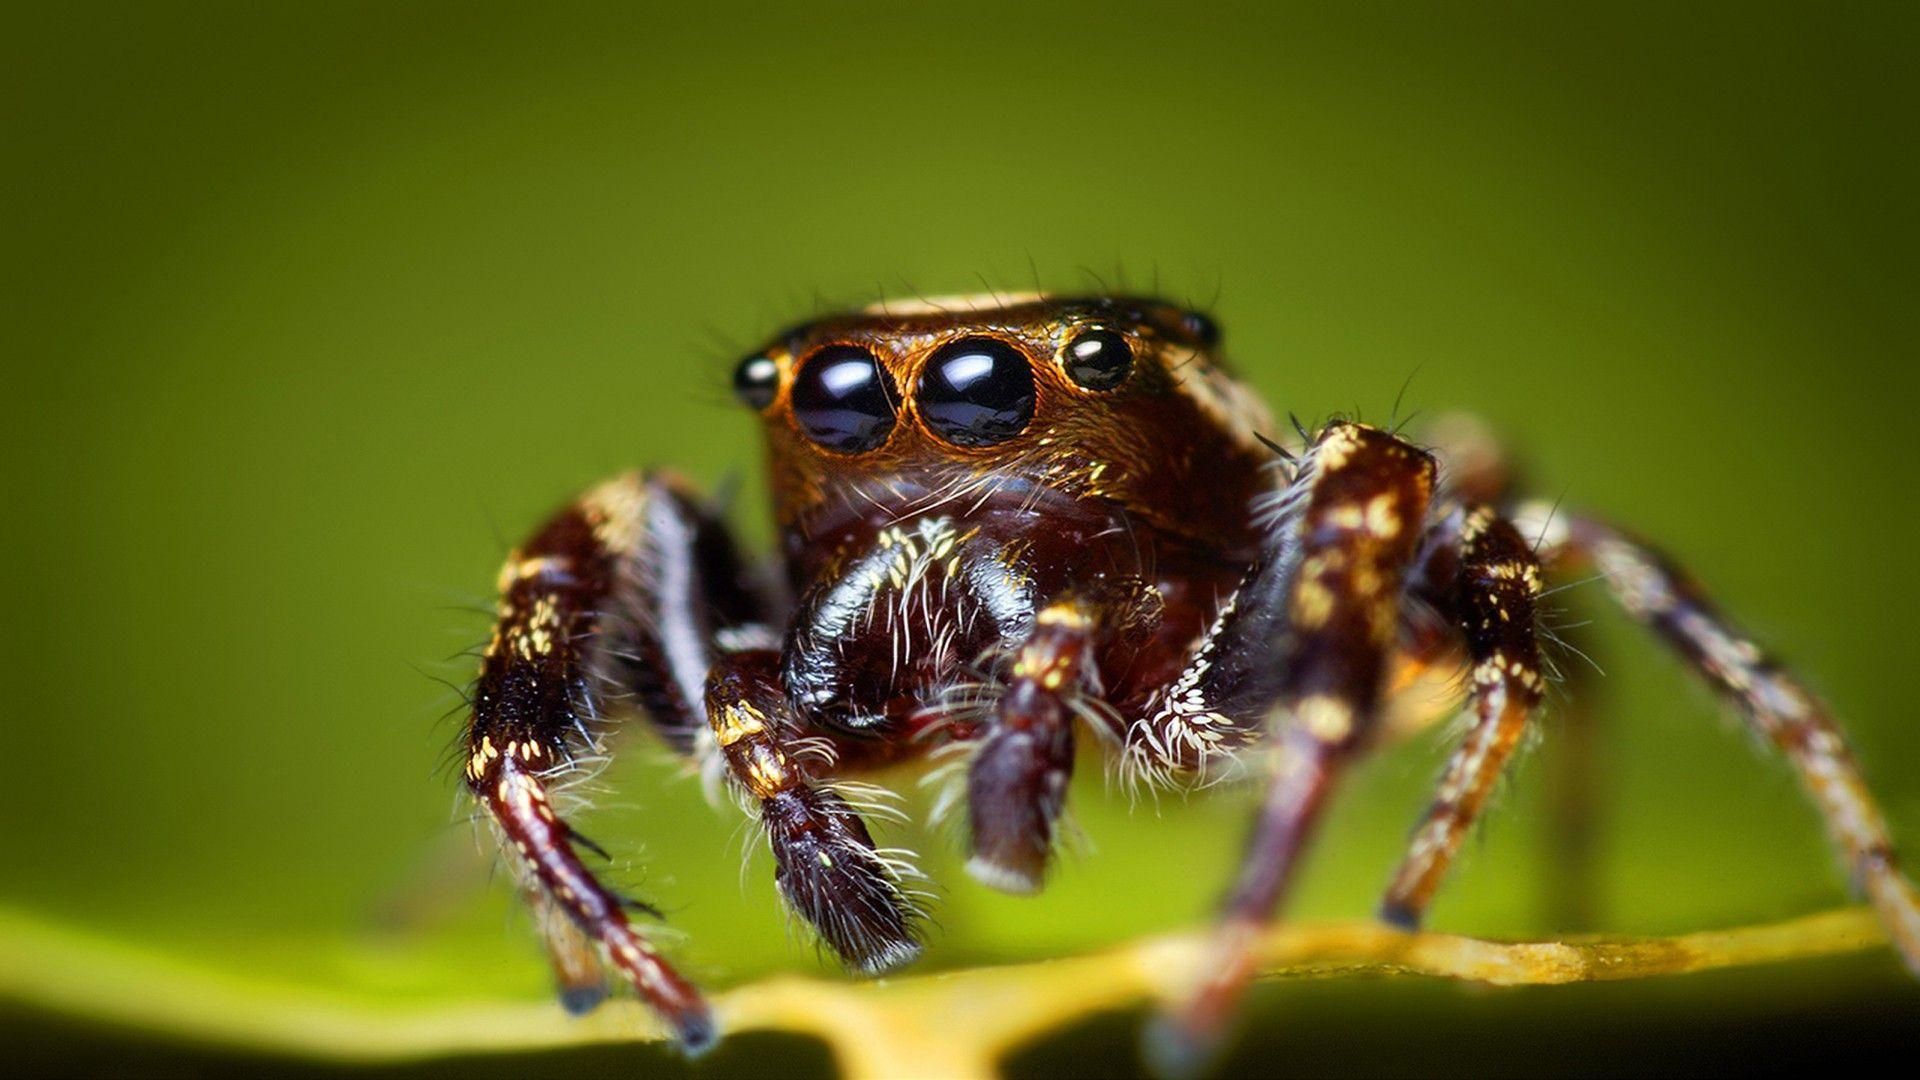 Spider Wallpaper. Best Wallpaper. Jumping spider, Insects, Spider